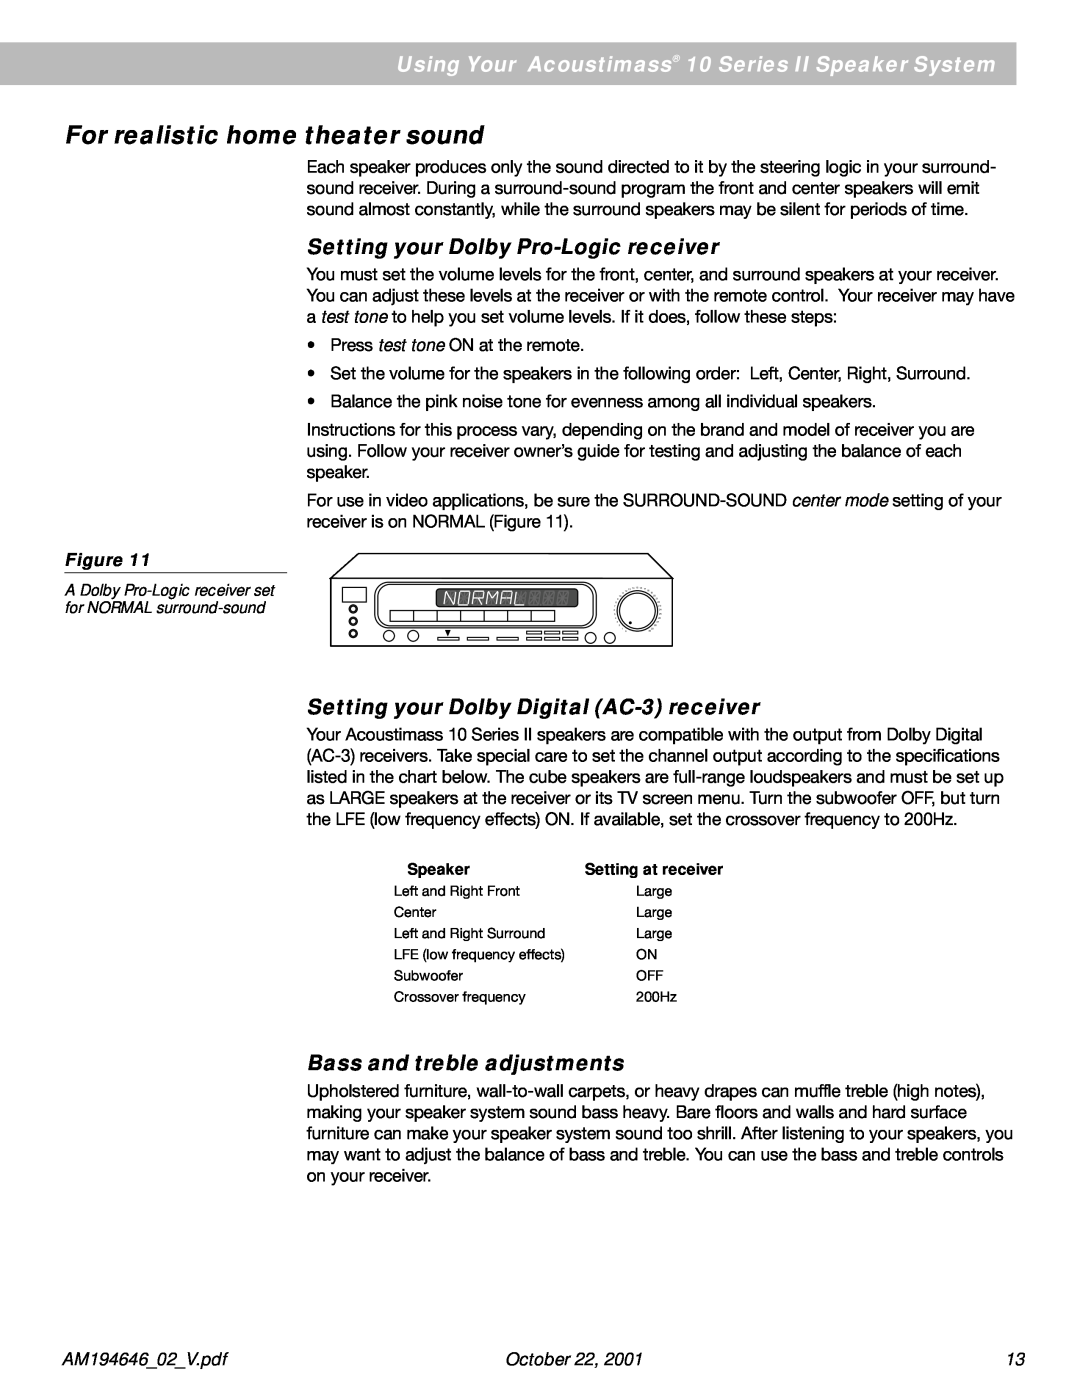 Bose 10 Series II manual Setting your Dolby Pro-Logicreceiver, Setting your Dolby Digital AC-3receiver, October 